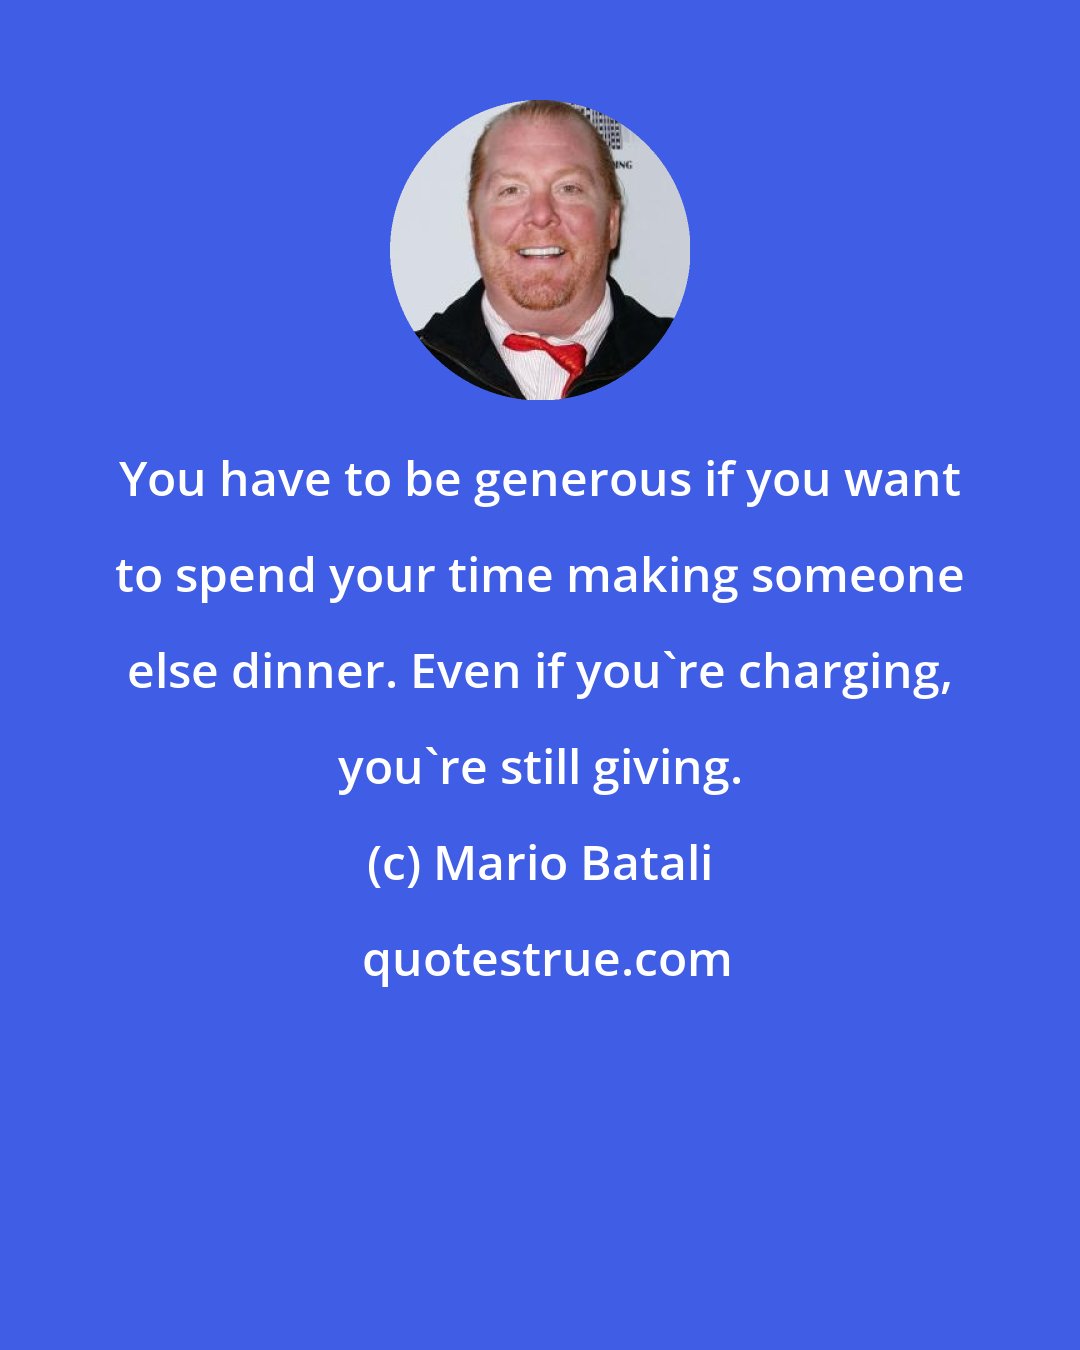 Mario Batali: You have to be generous if you want to spend your time making someone else dinner. Even if you're charging, you're still giving.